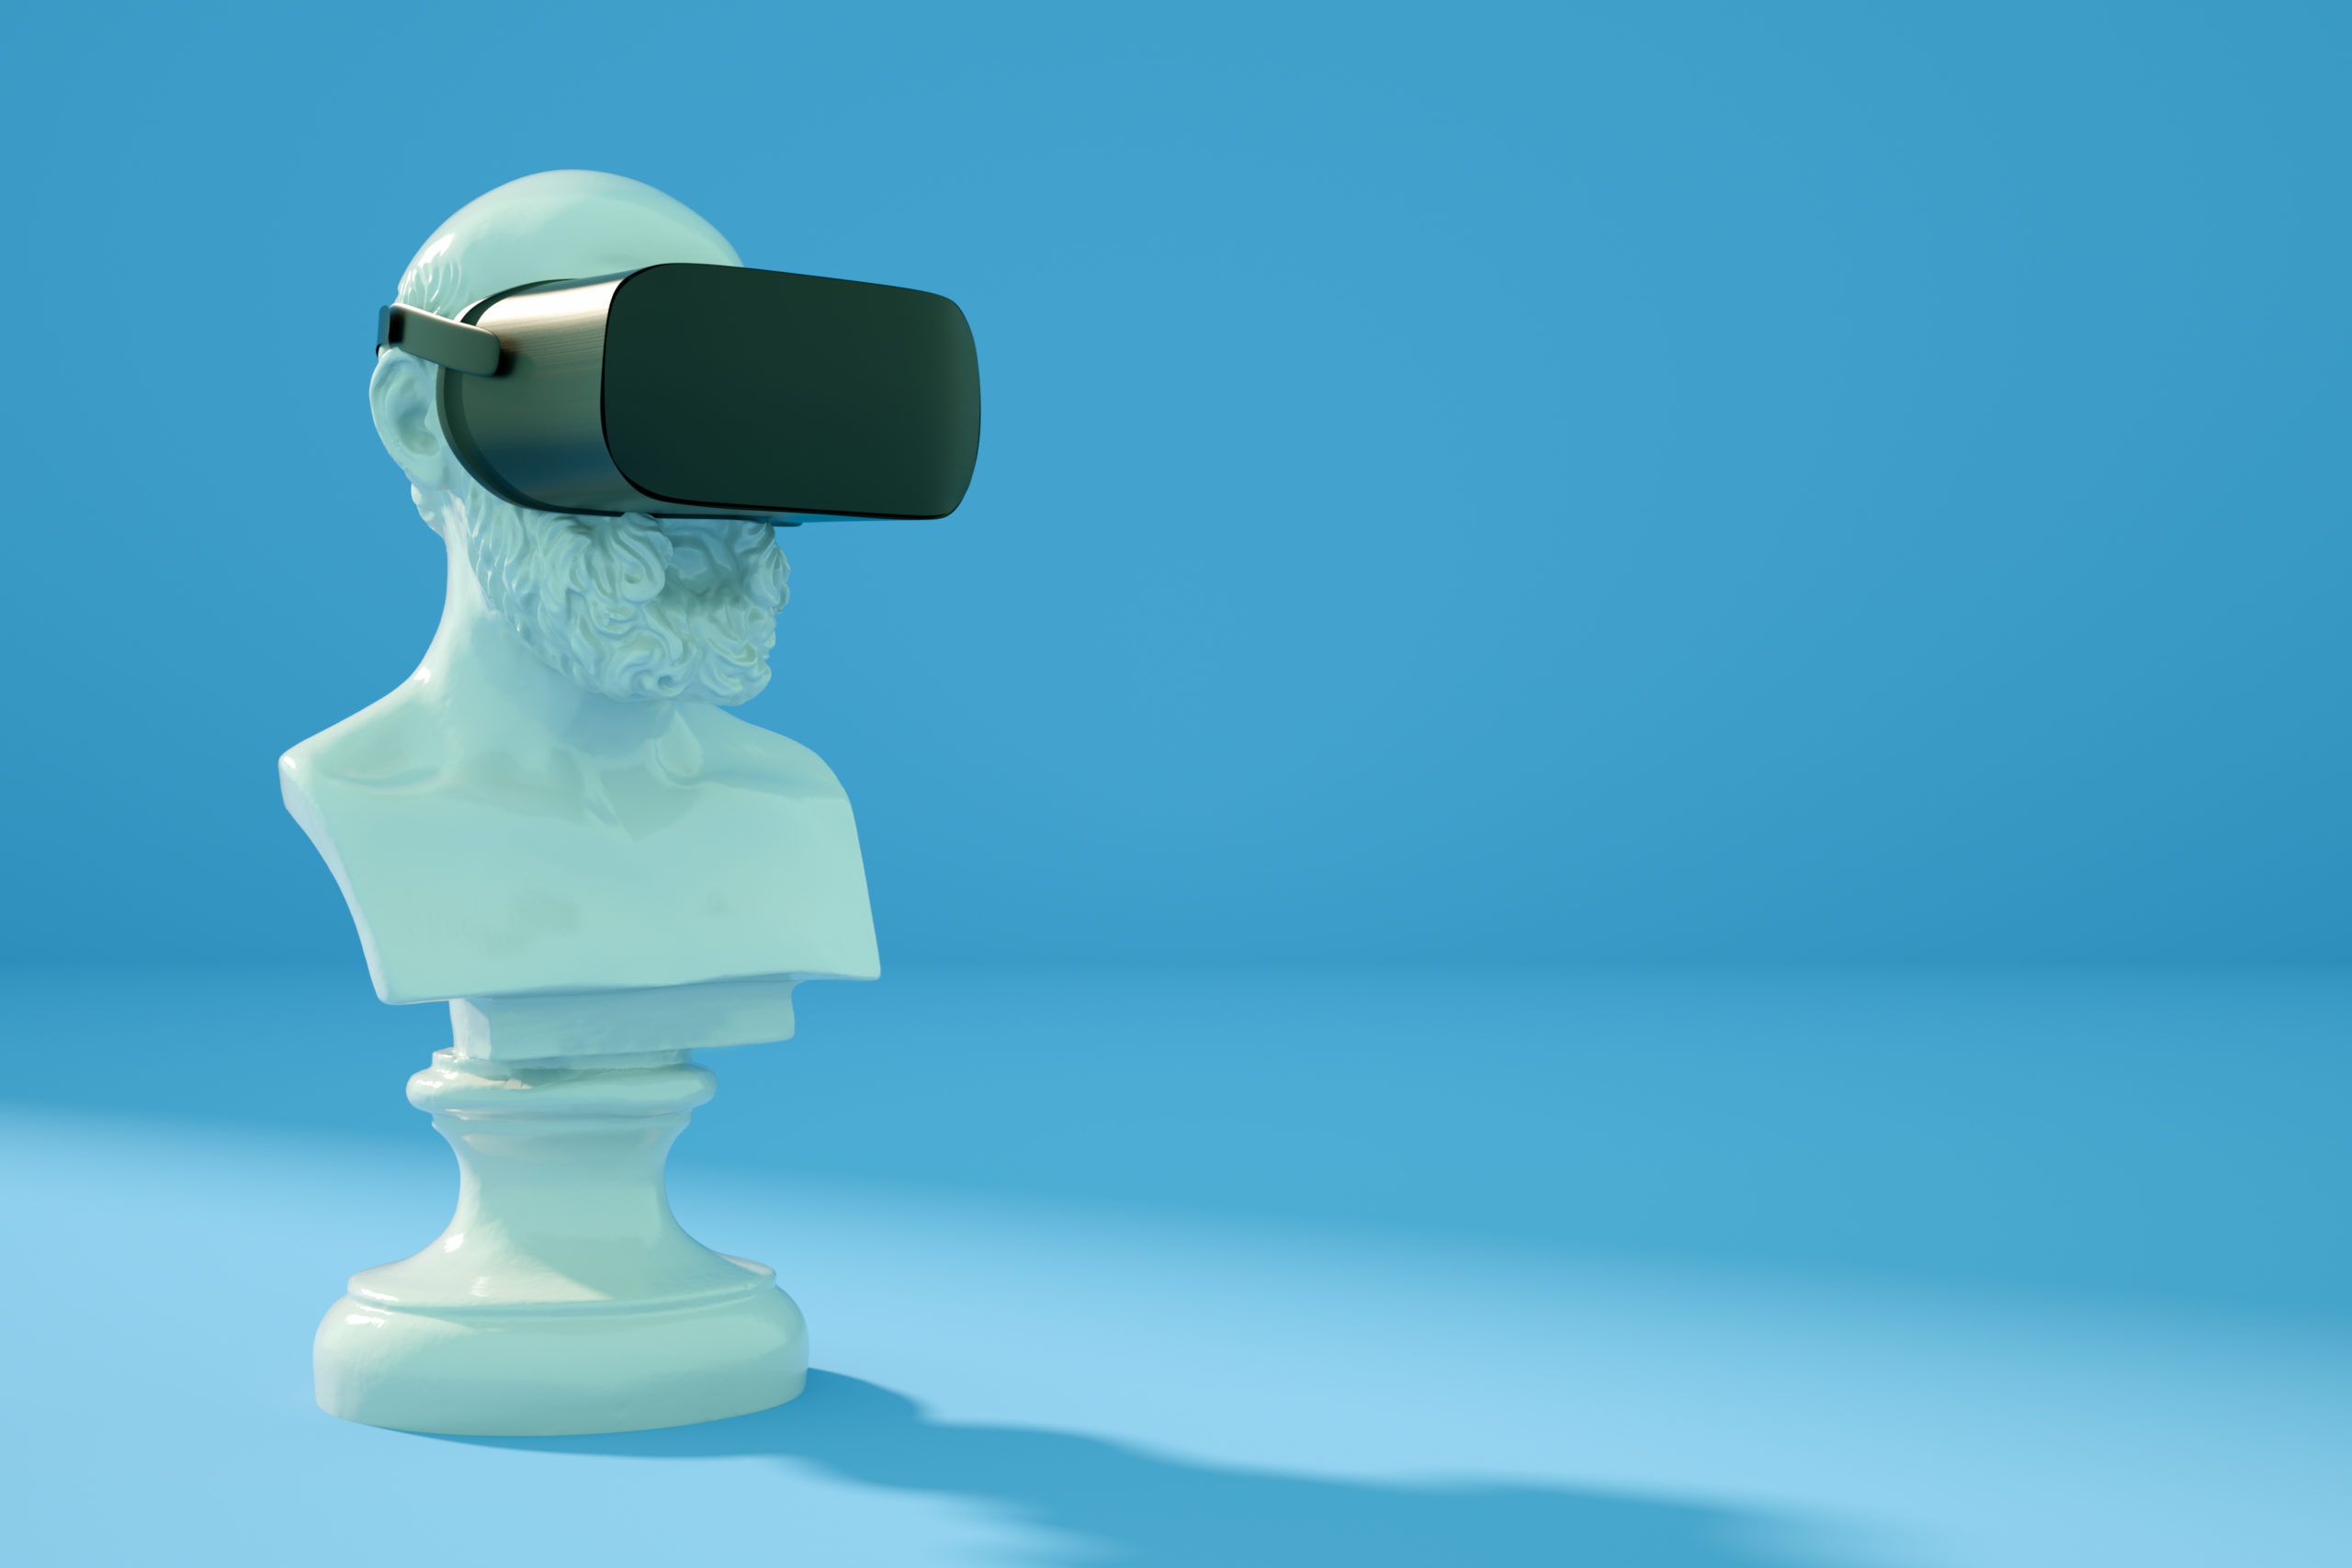 Sculpture With VR Glasses Headset on Blue Background